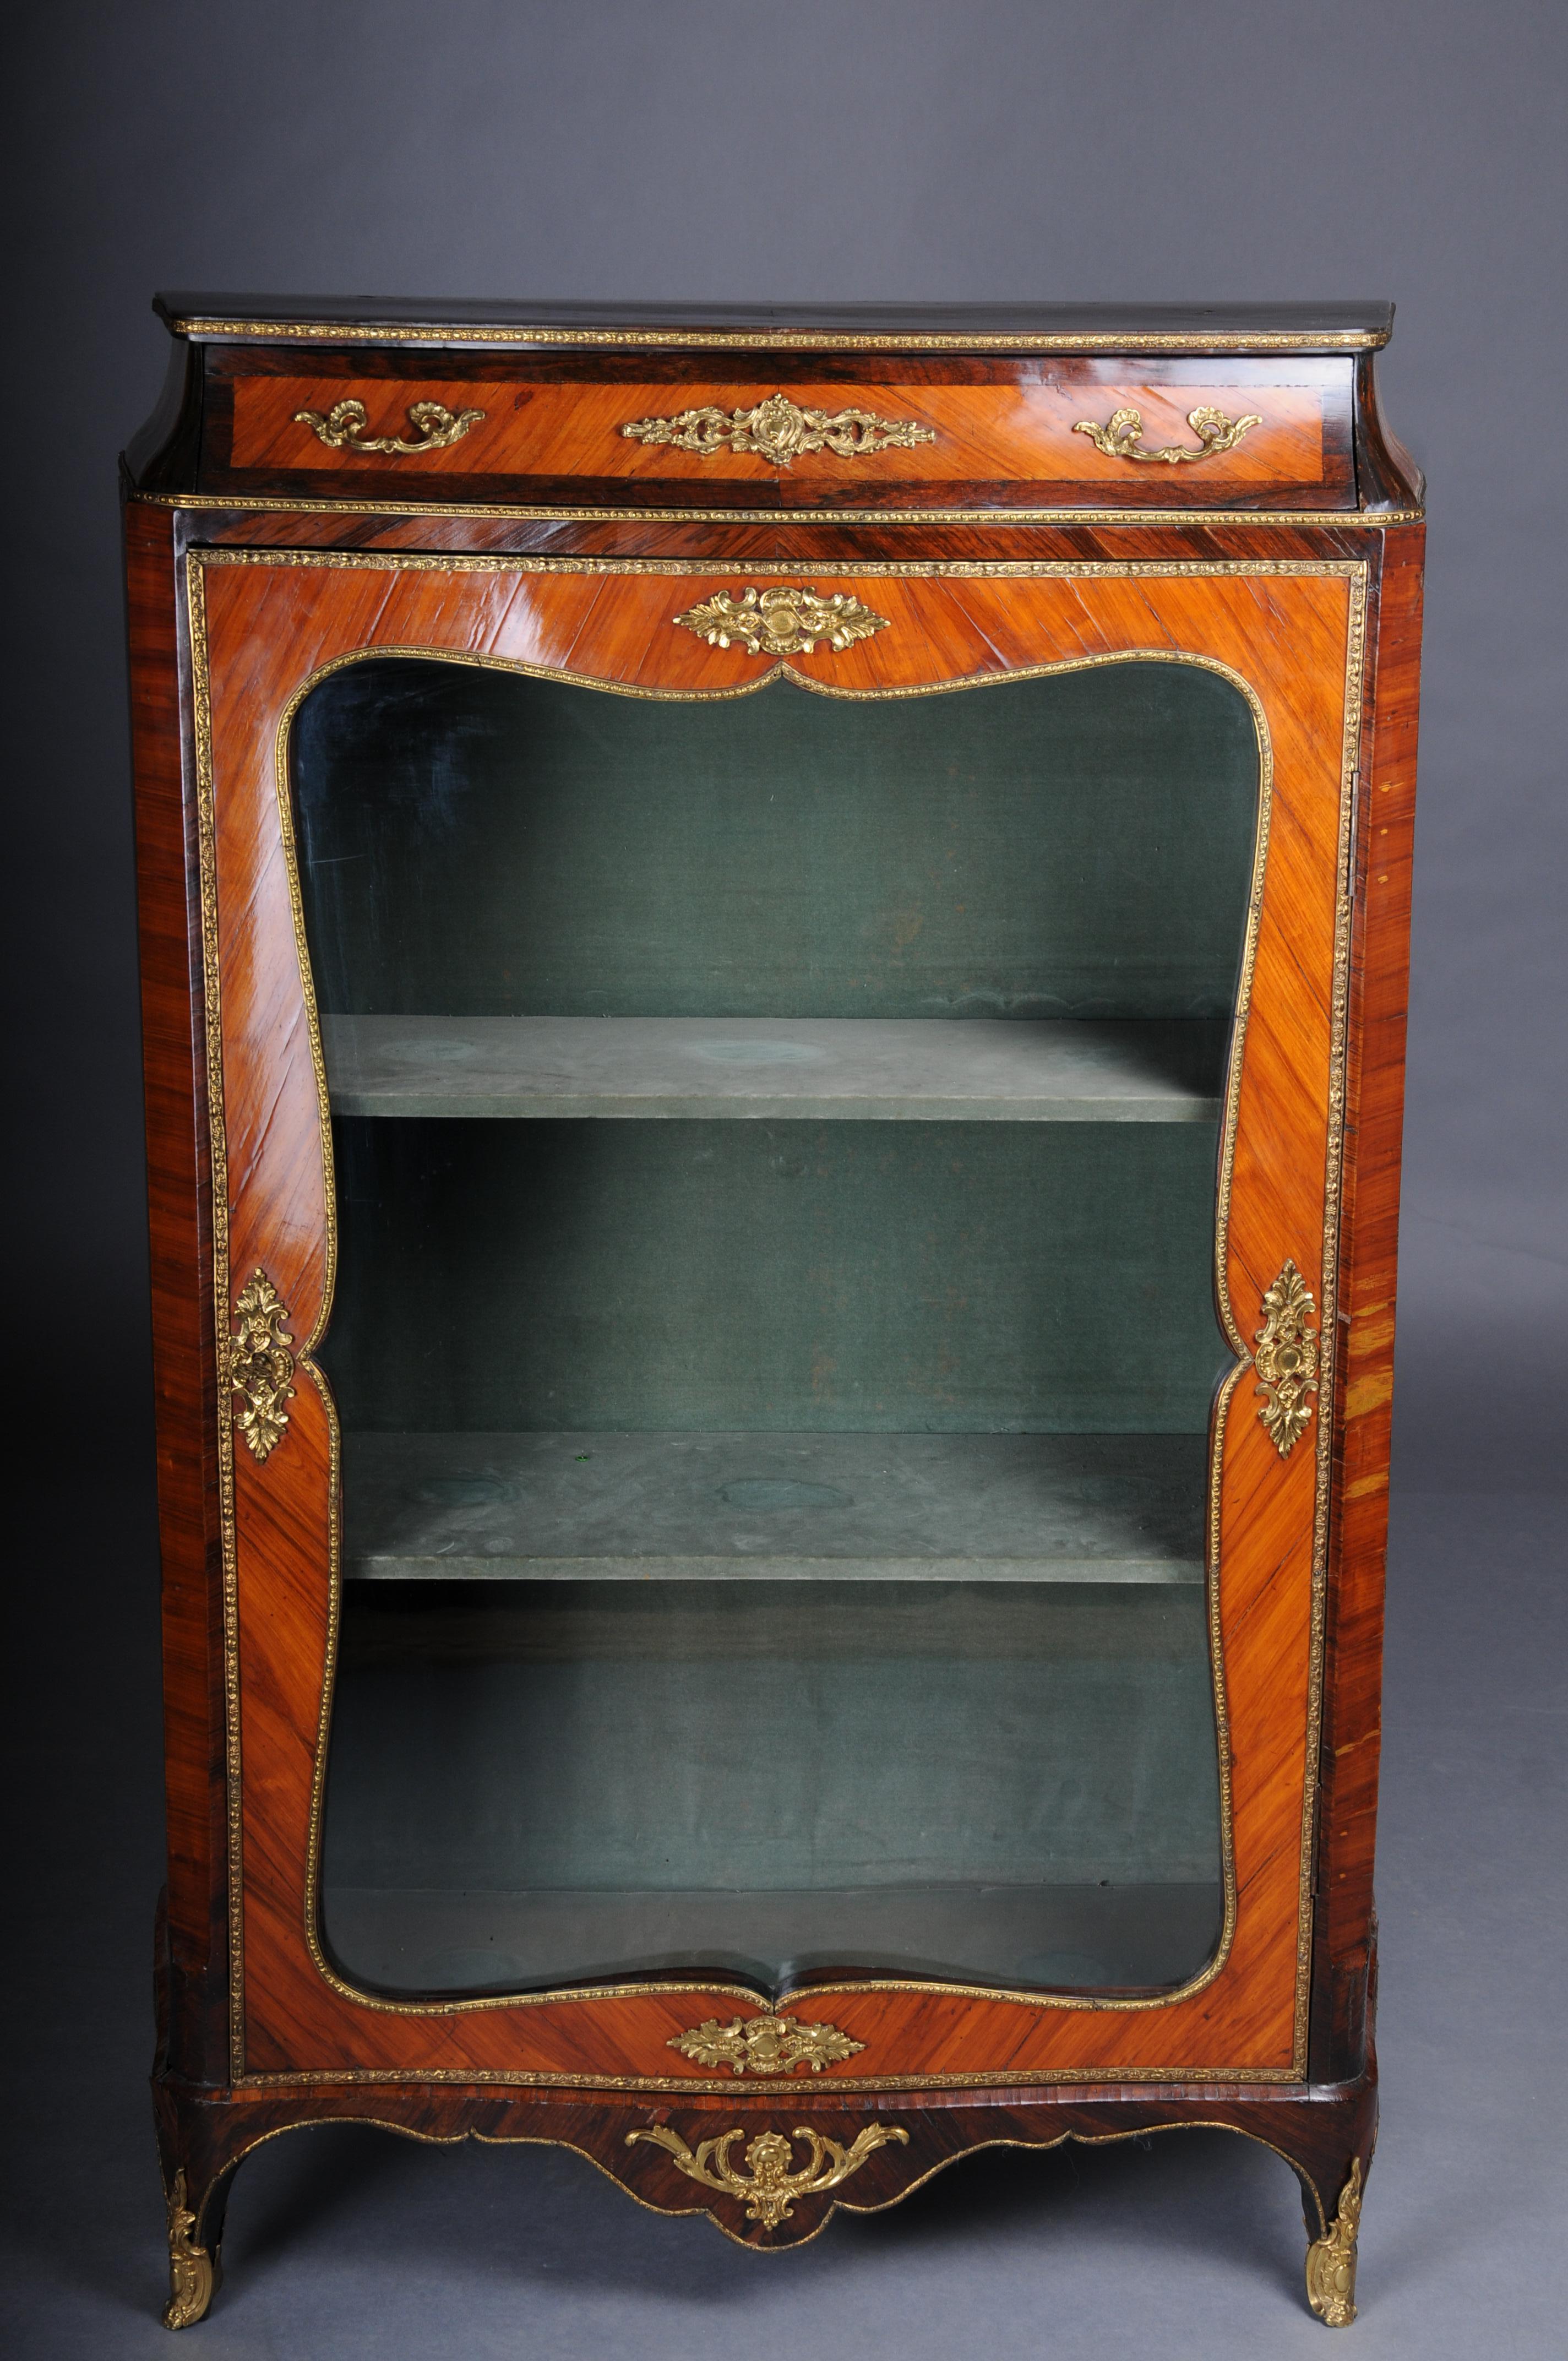 French Louis XV decorative display case signed Paris around 1860

Solid oak wood with fine veneer (mirror veneer)
Highly rectangular body made of solid oak and fine wood veneer. Single-door display cabinet/high chest of drawers, interior covered